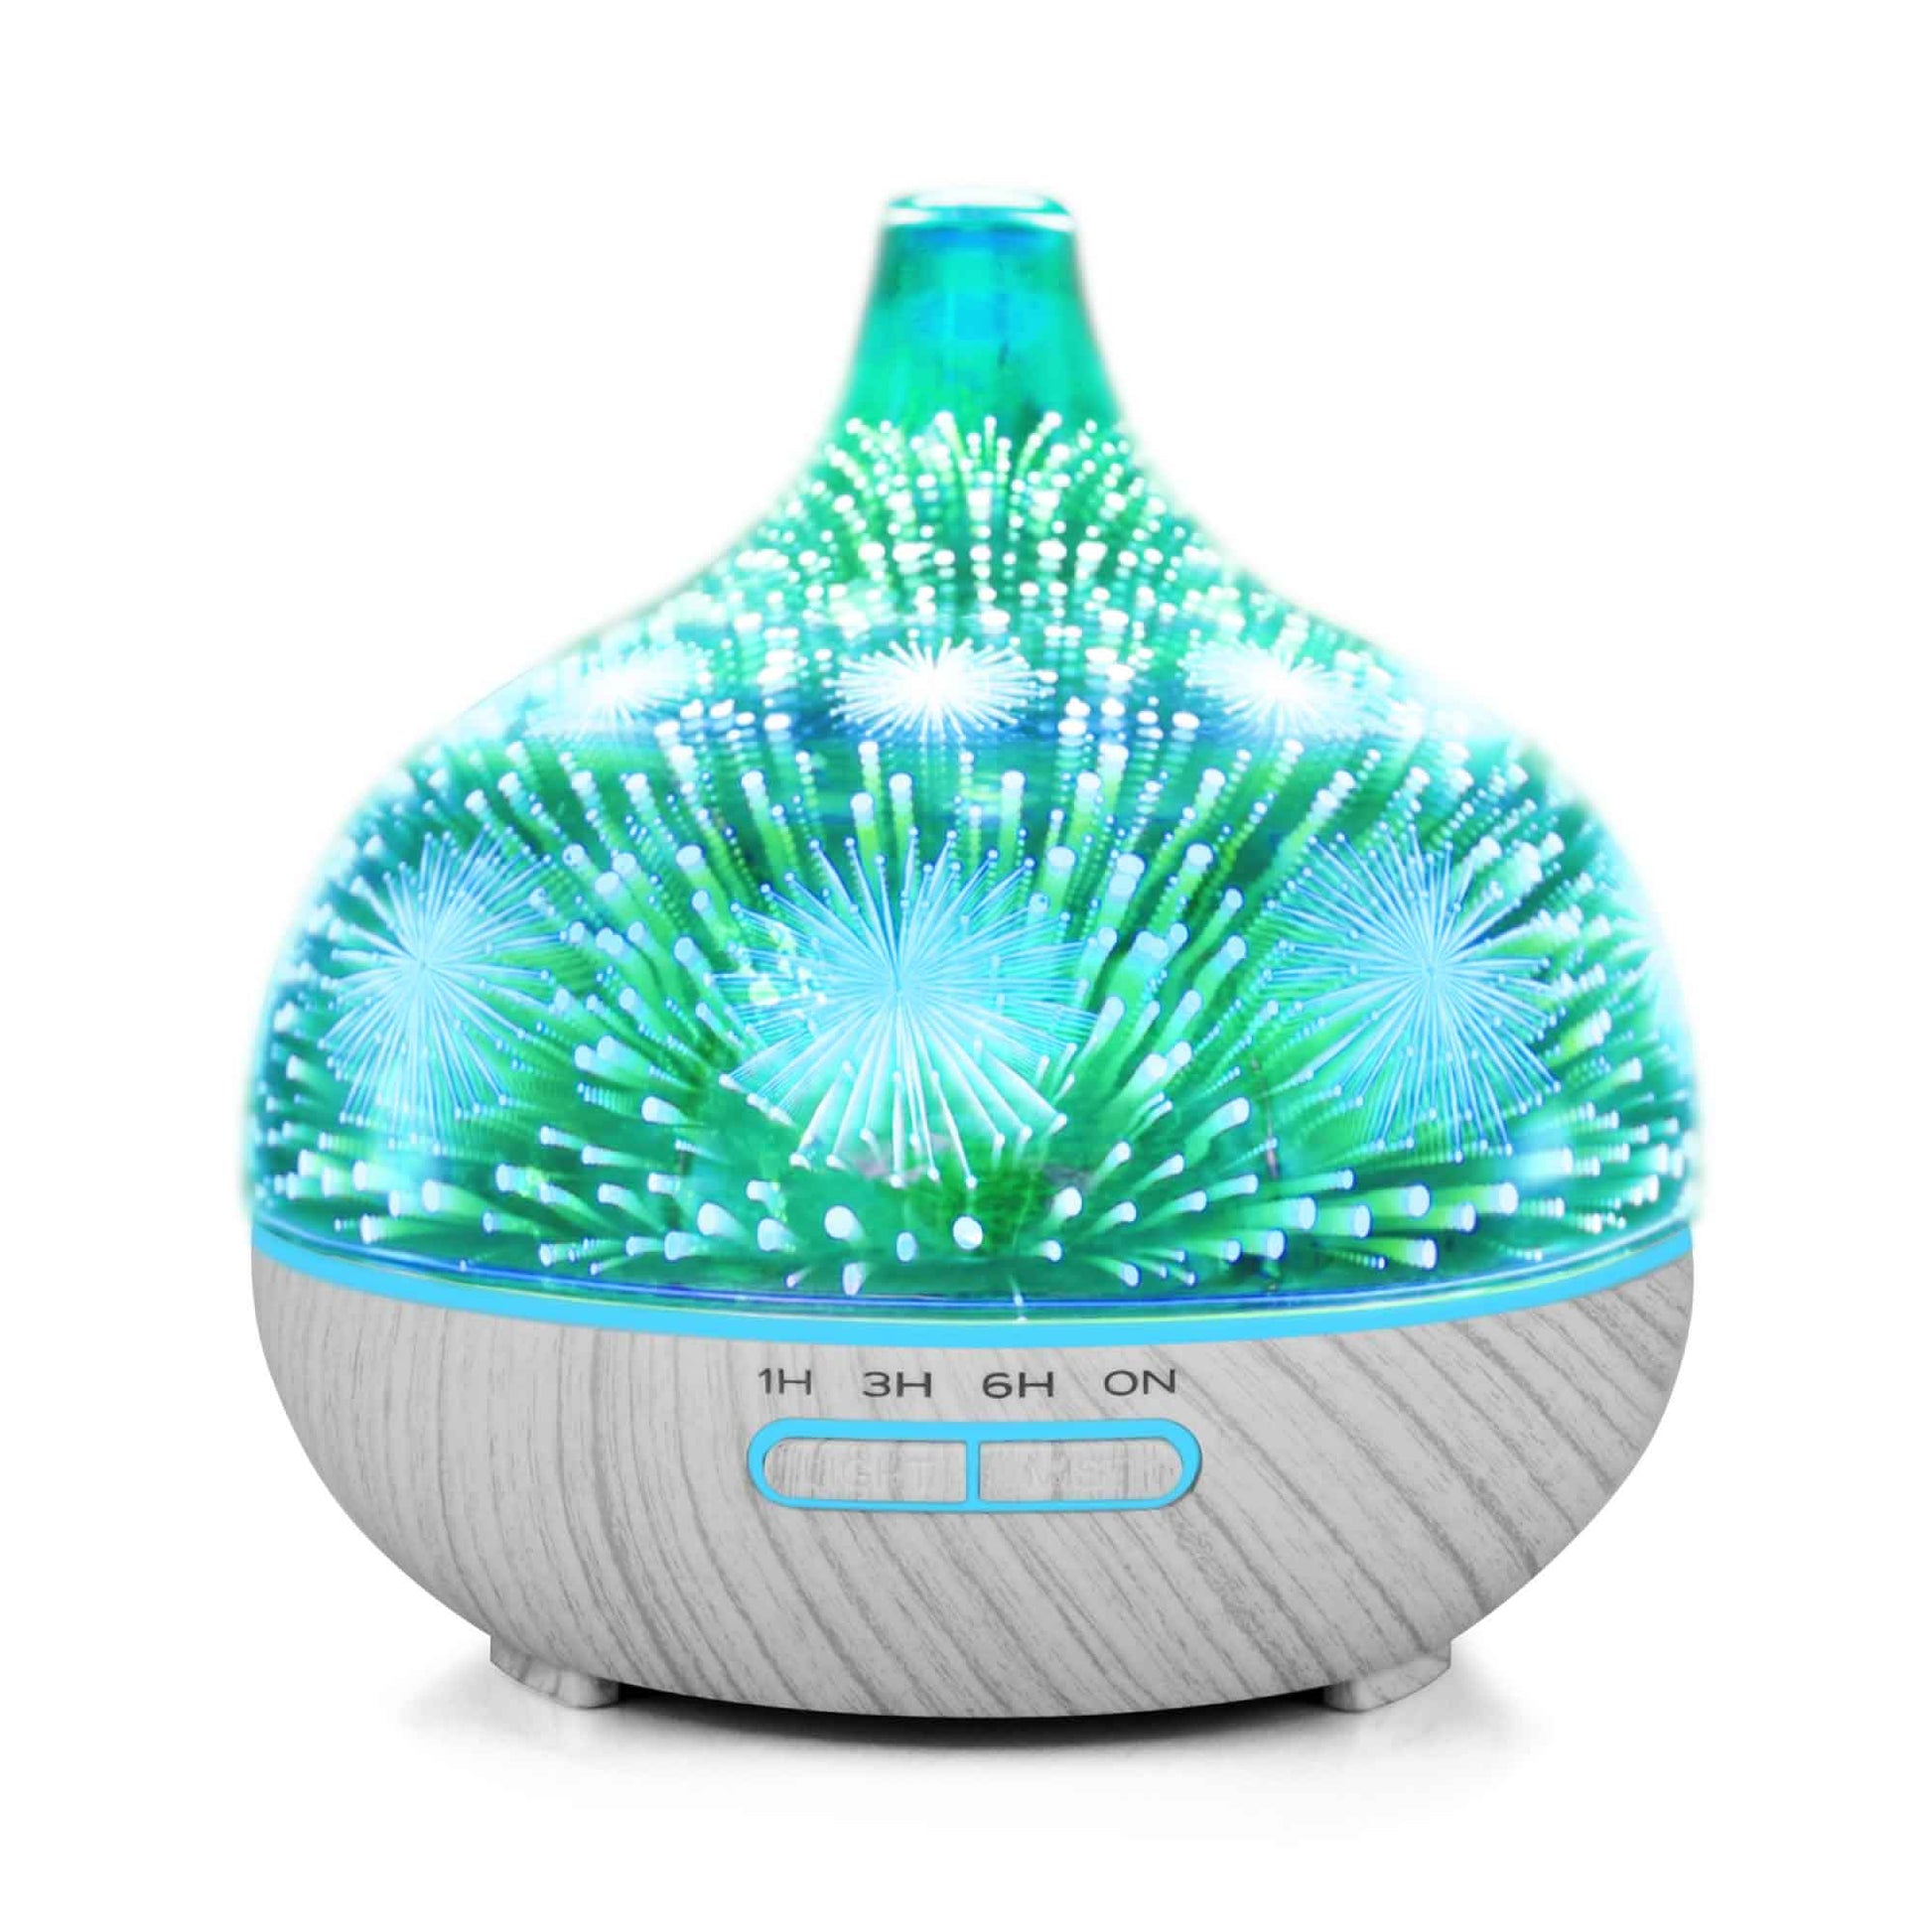 400ml Essential Oil Aroma Diffuser and Remote - 3D Glass Aromatherapy Humidifier